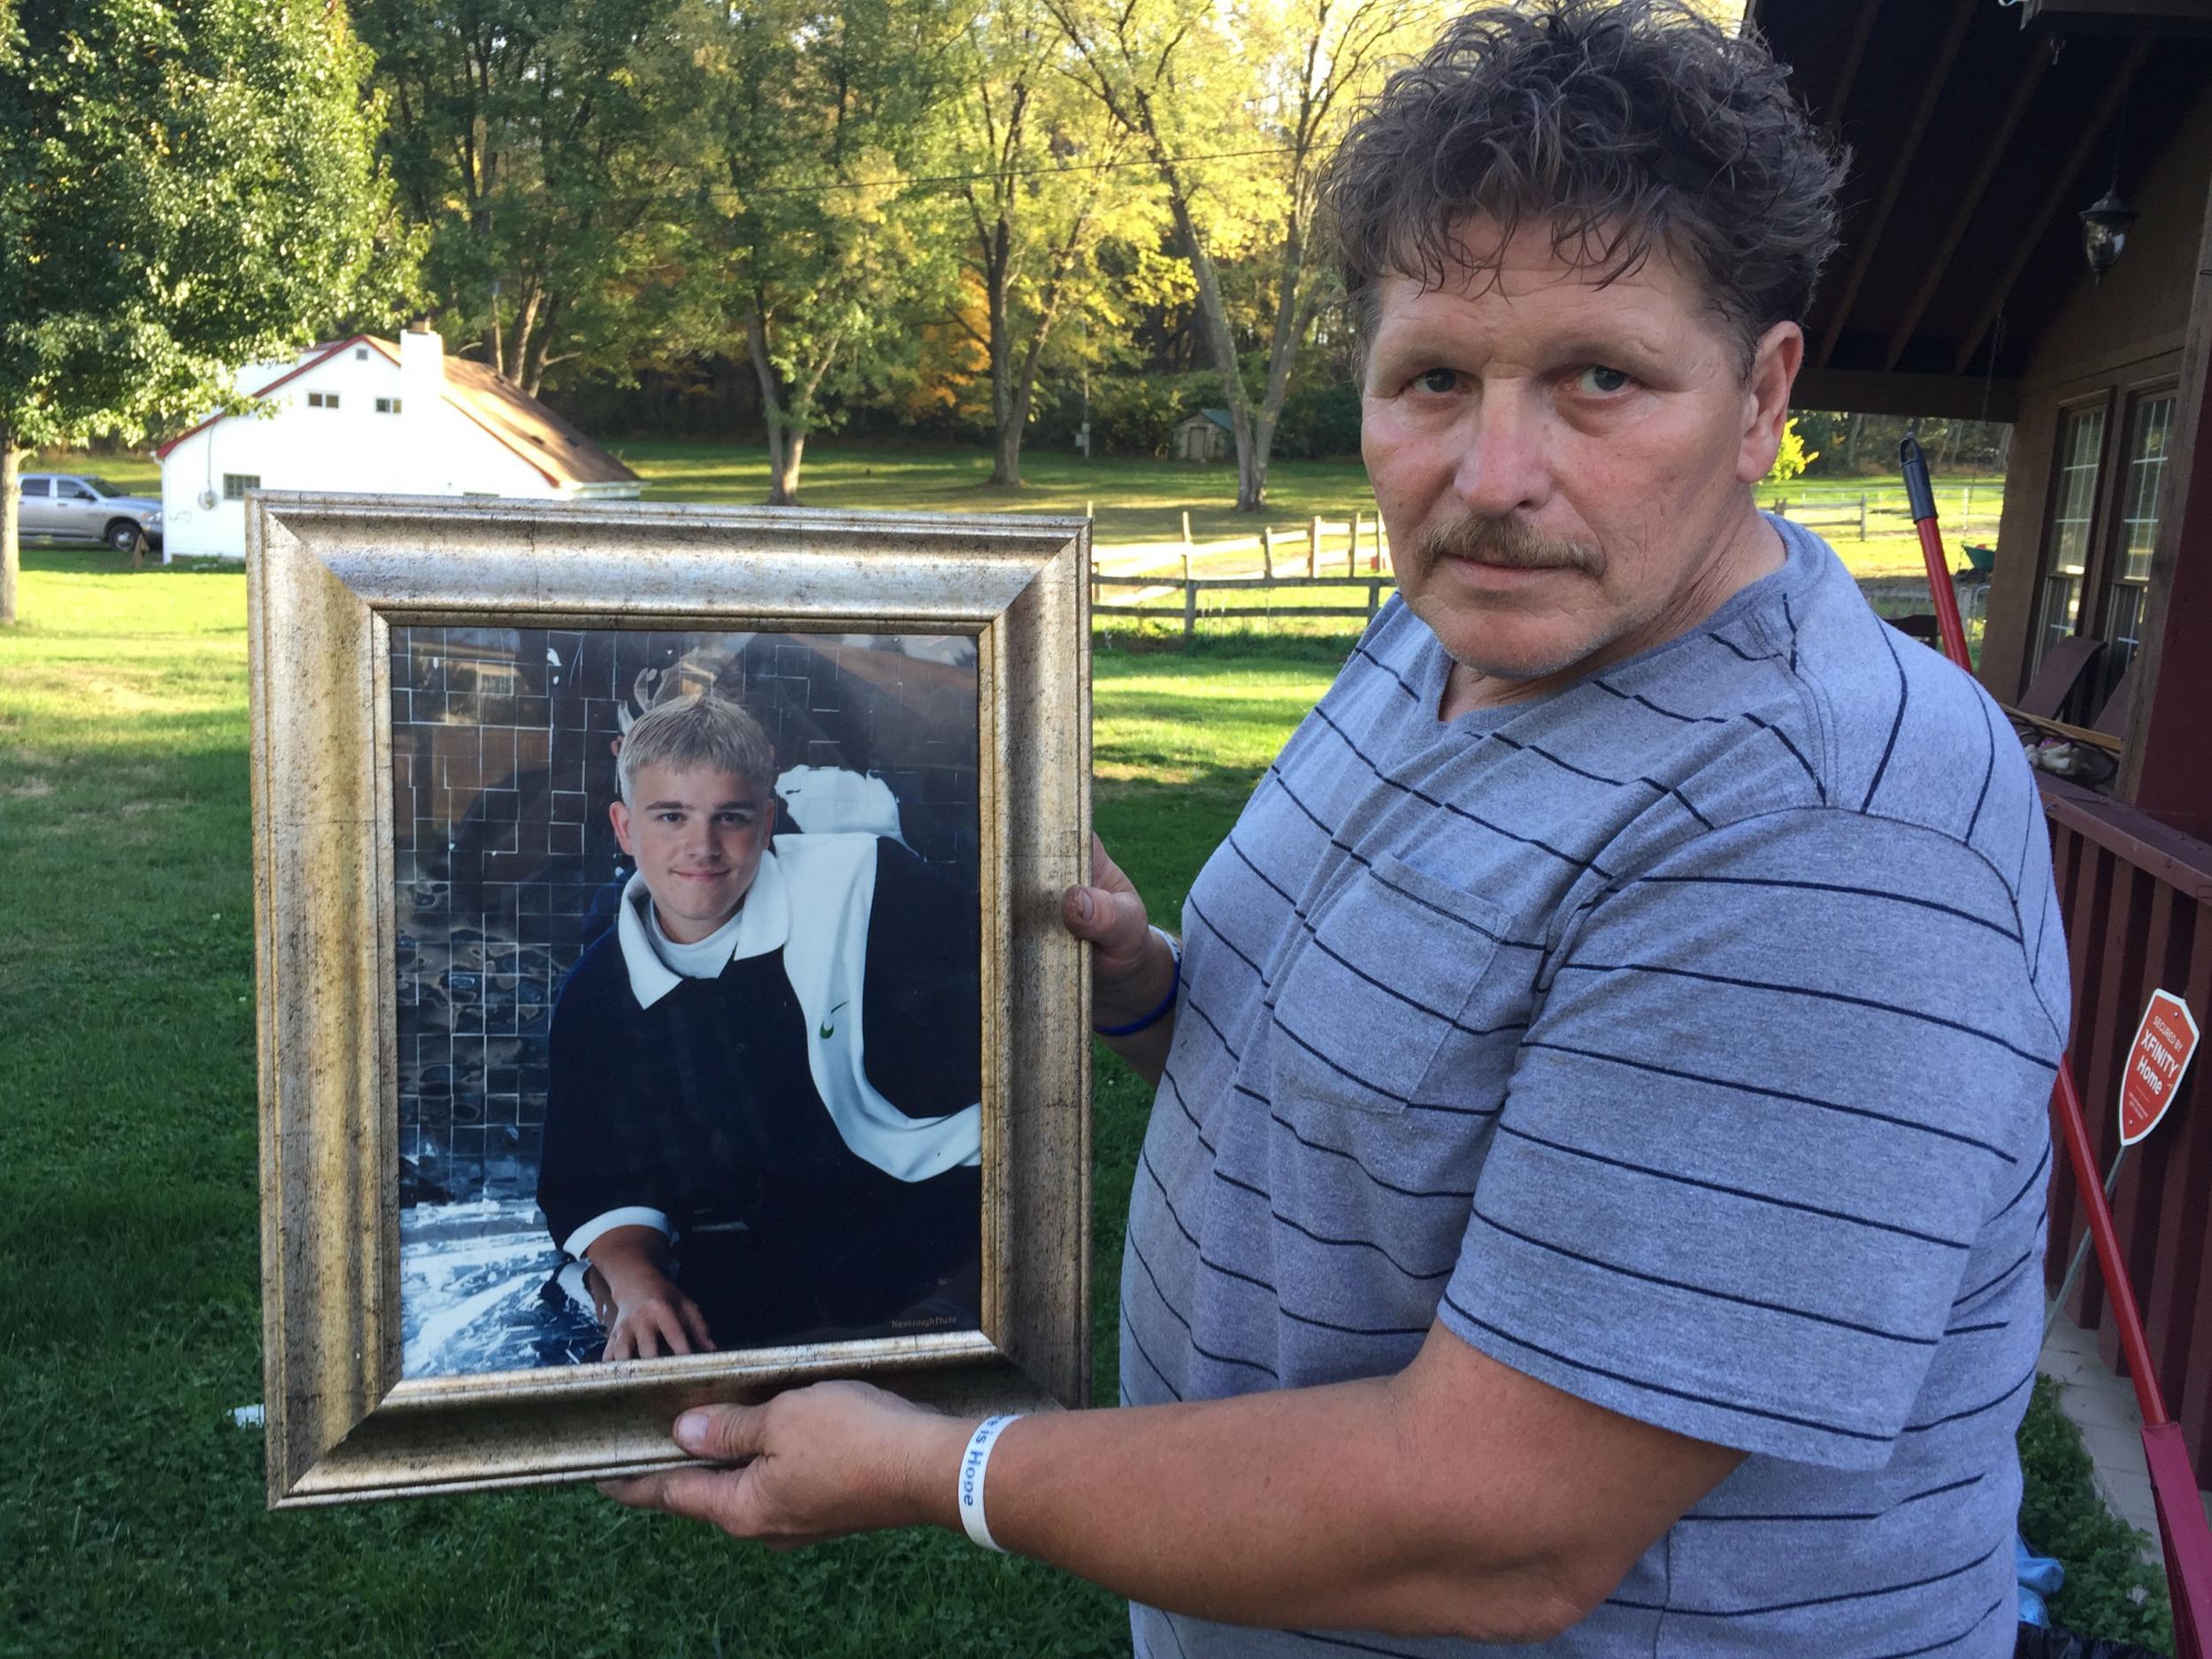 Blaine McCartney's son Dale died in 2008 – another victim of heroin